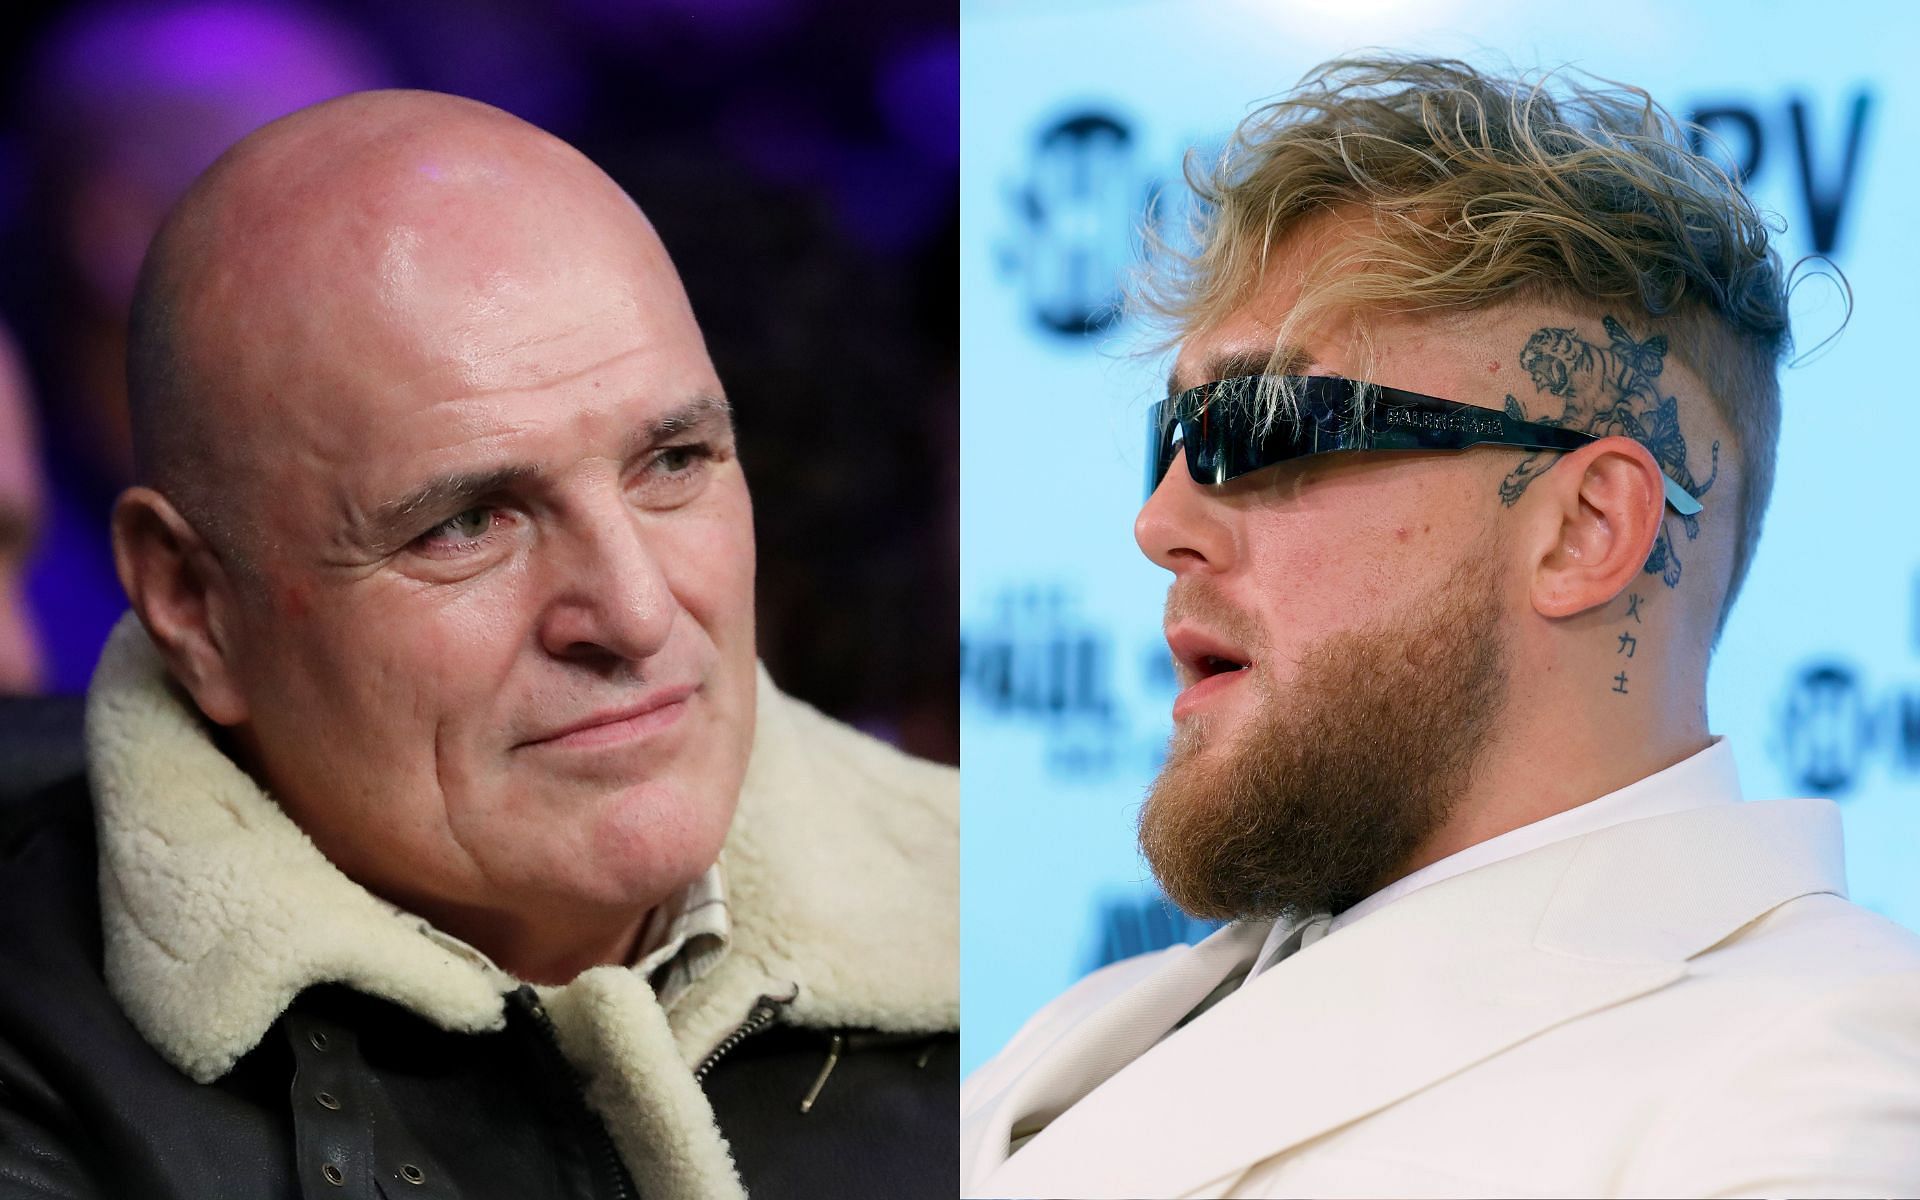 John Fury (left) and Jake Paul (right) were involved in an intense verbal battle